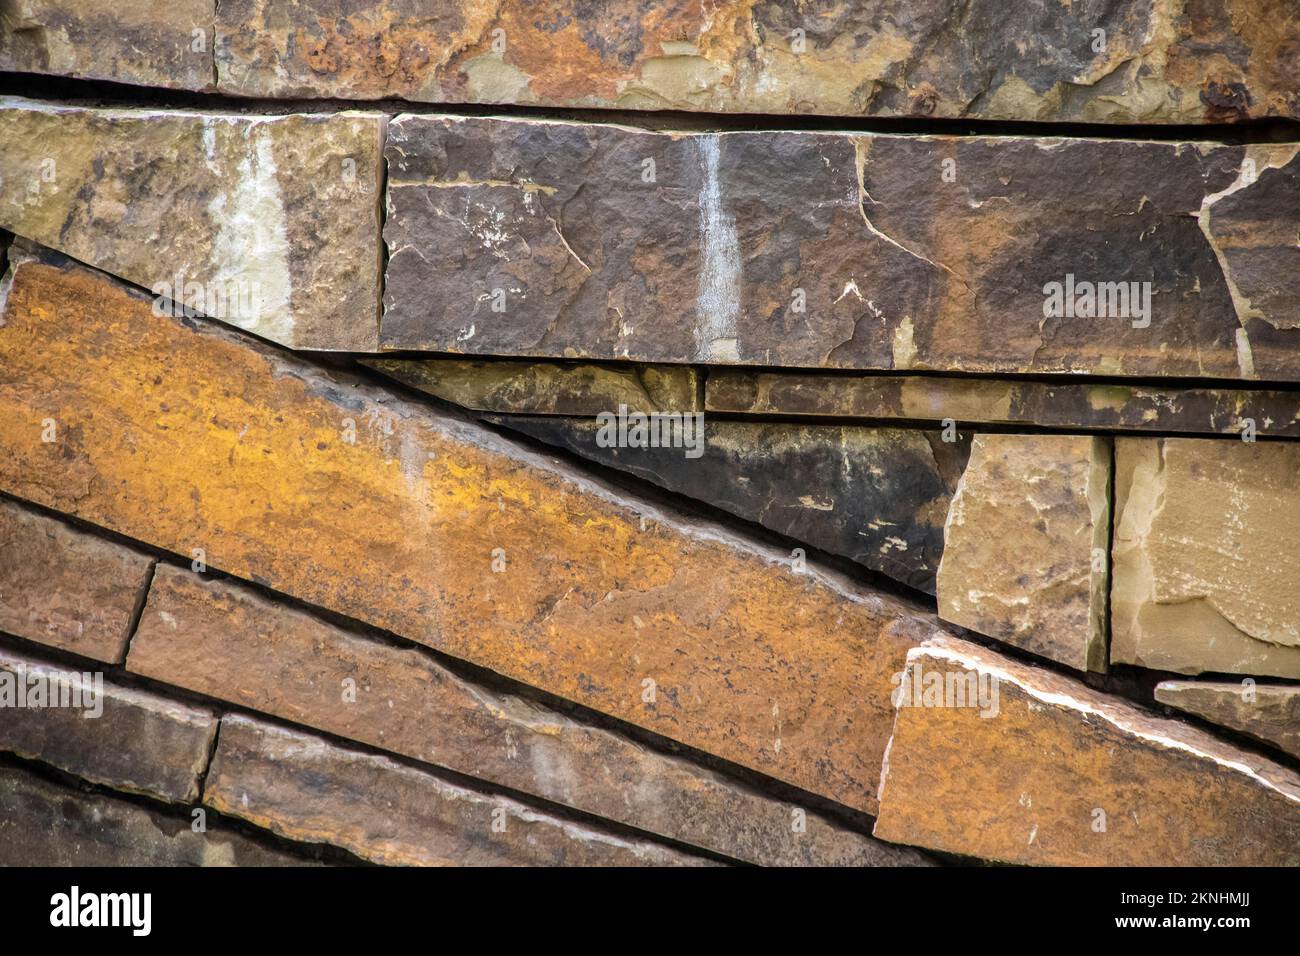 Background of sandstone rocks stacked with some on a diagonal and some horizontal - variety of colors and textures Stock Photo